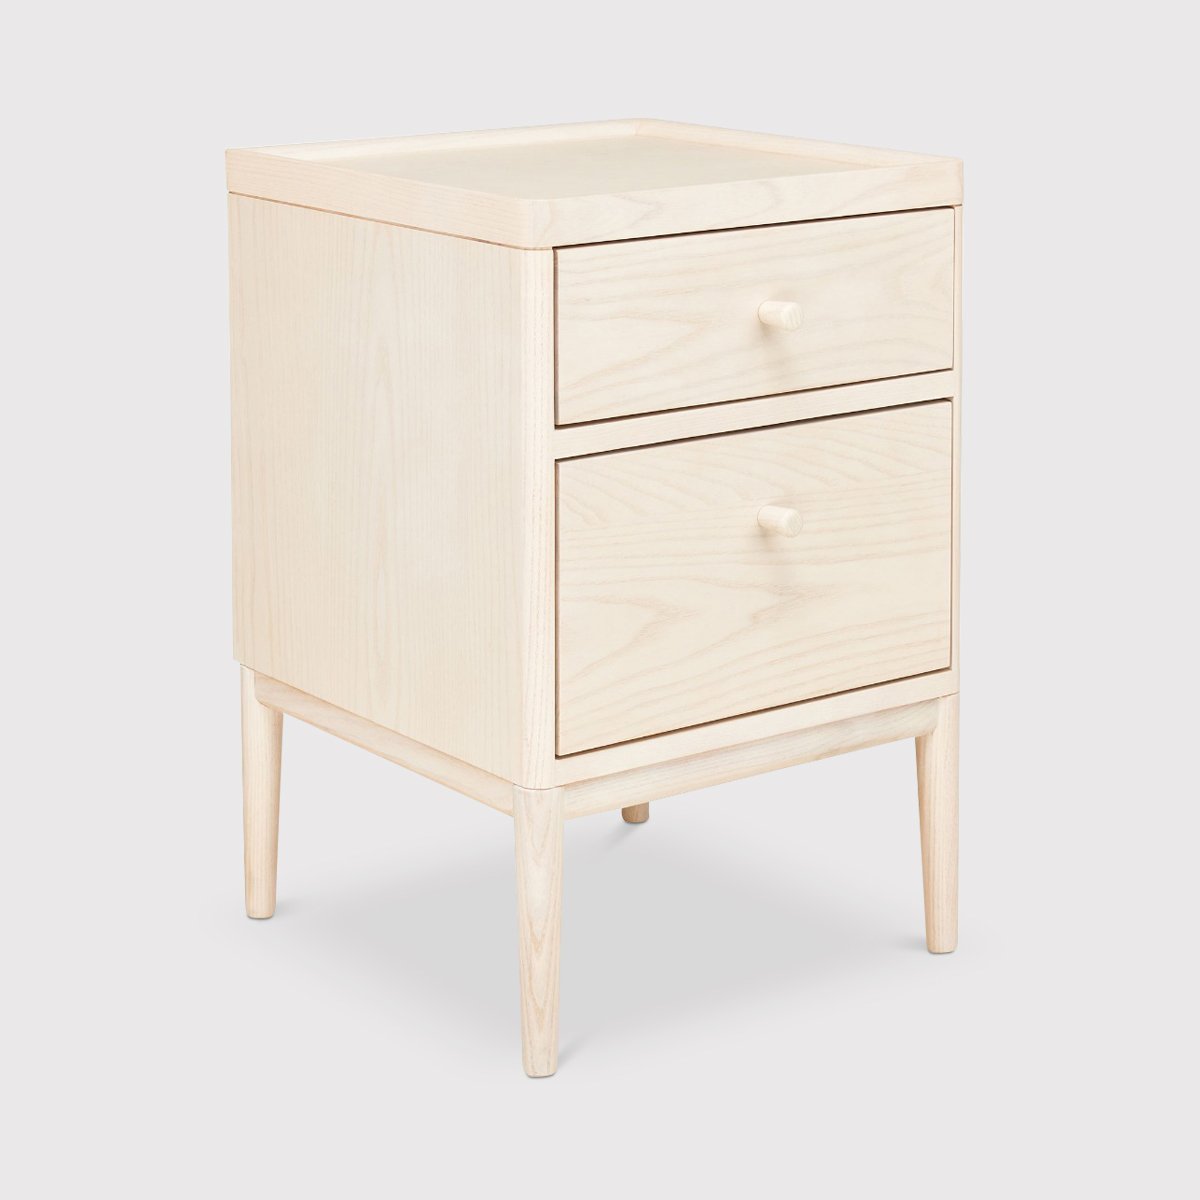 Ercol Salina Two Drawer Bedside Cabinet, Neutral | Barker & Stonehouse